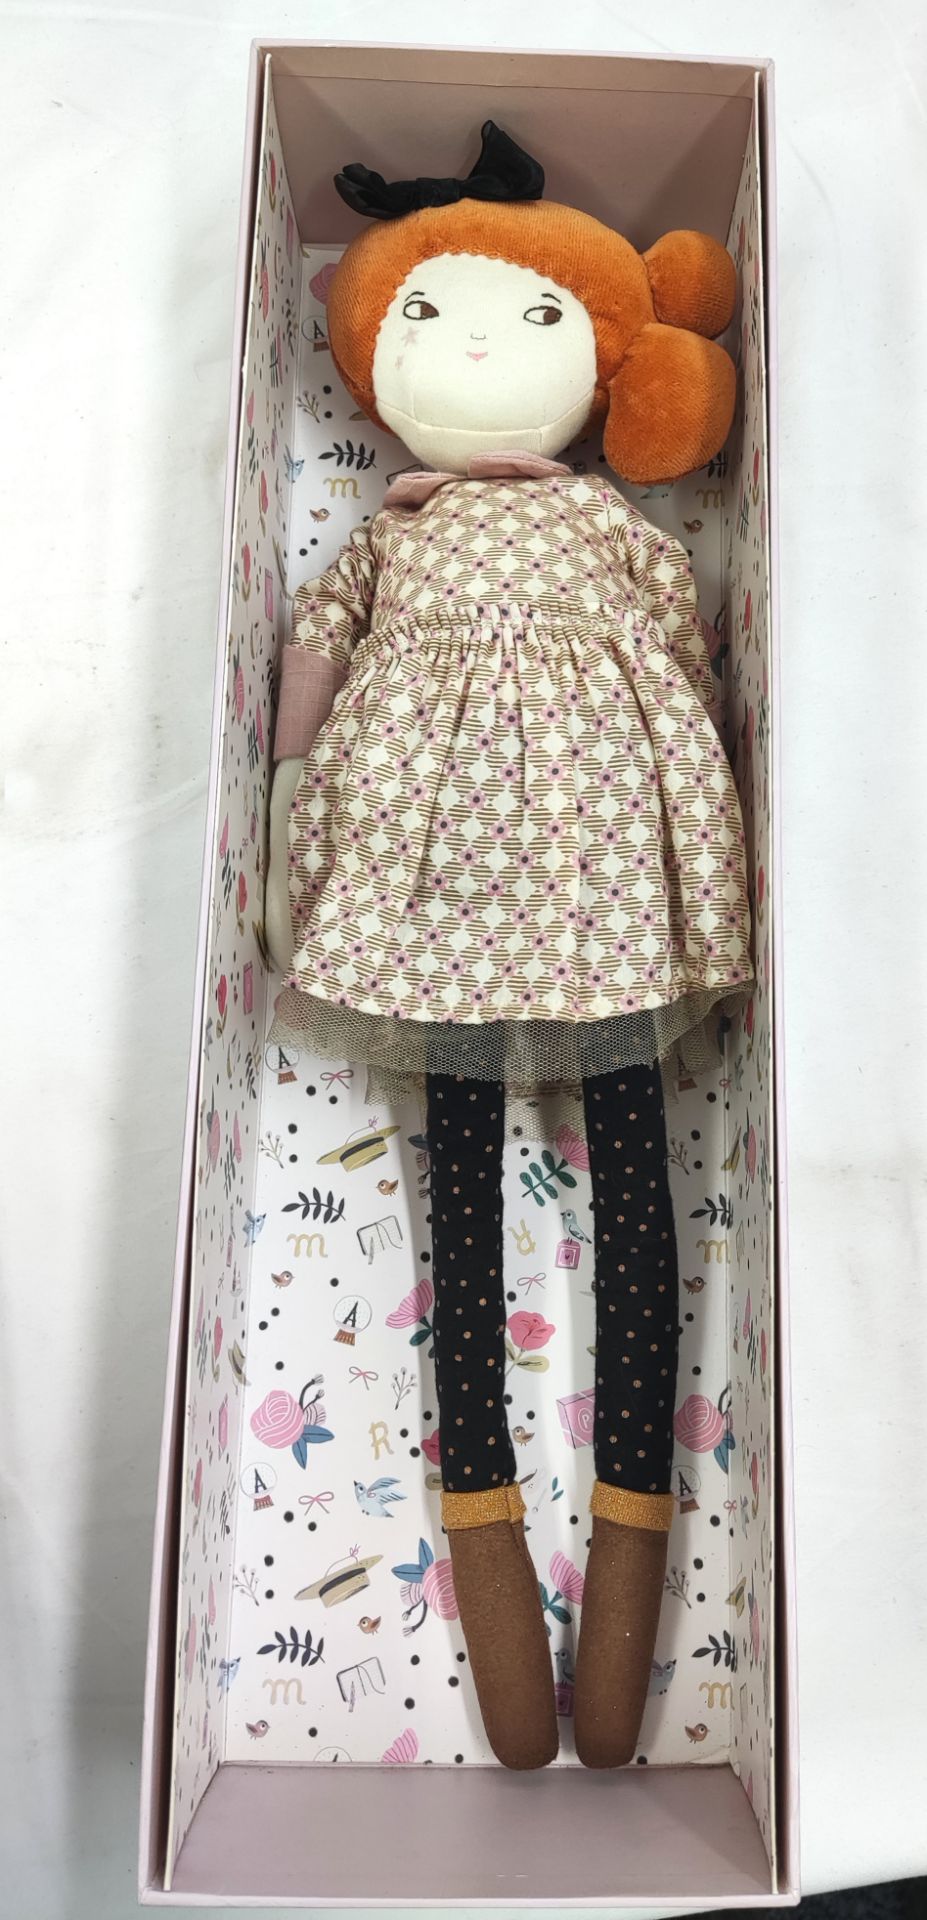 1 x MOULIN ROTY Madame Constance 47cm Les Parisiennes Doll - New/Boxed - Original RRP £60.00 - Image 3 of 10